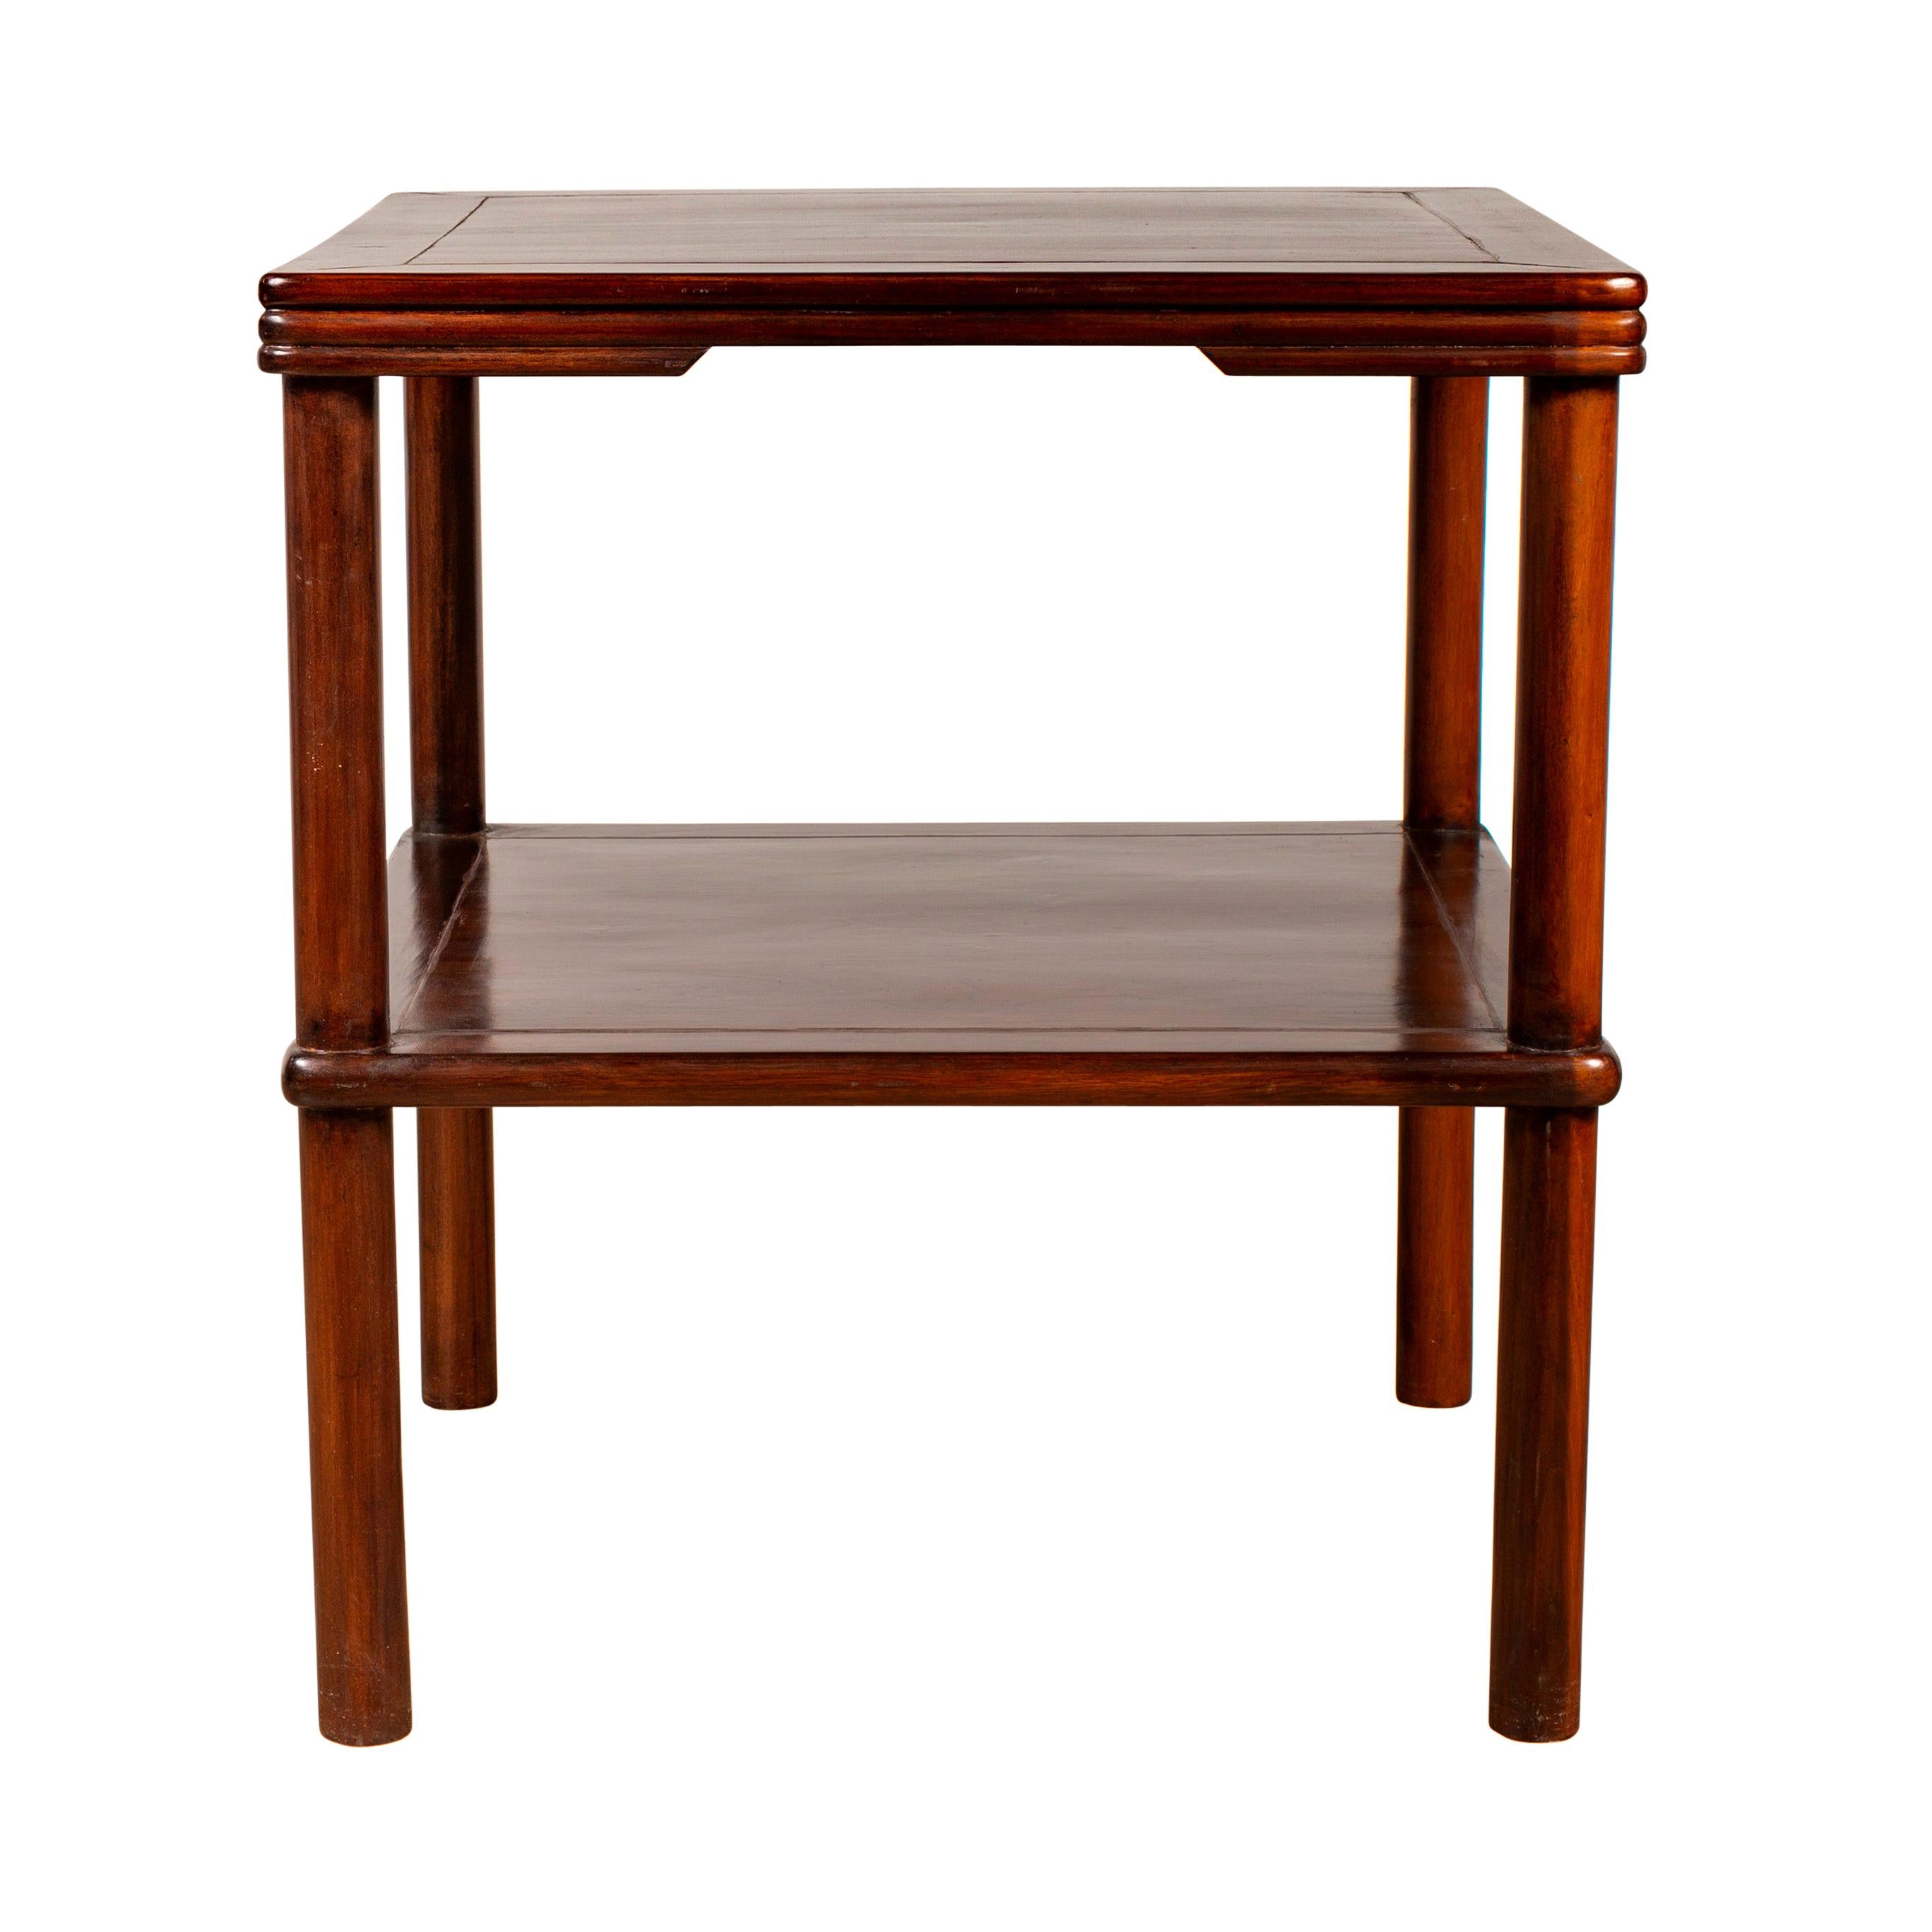 Chinese Vintage Midcentury Square-Shaped Side Table with Lower Shelf